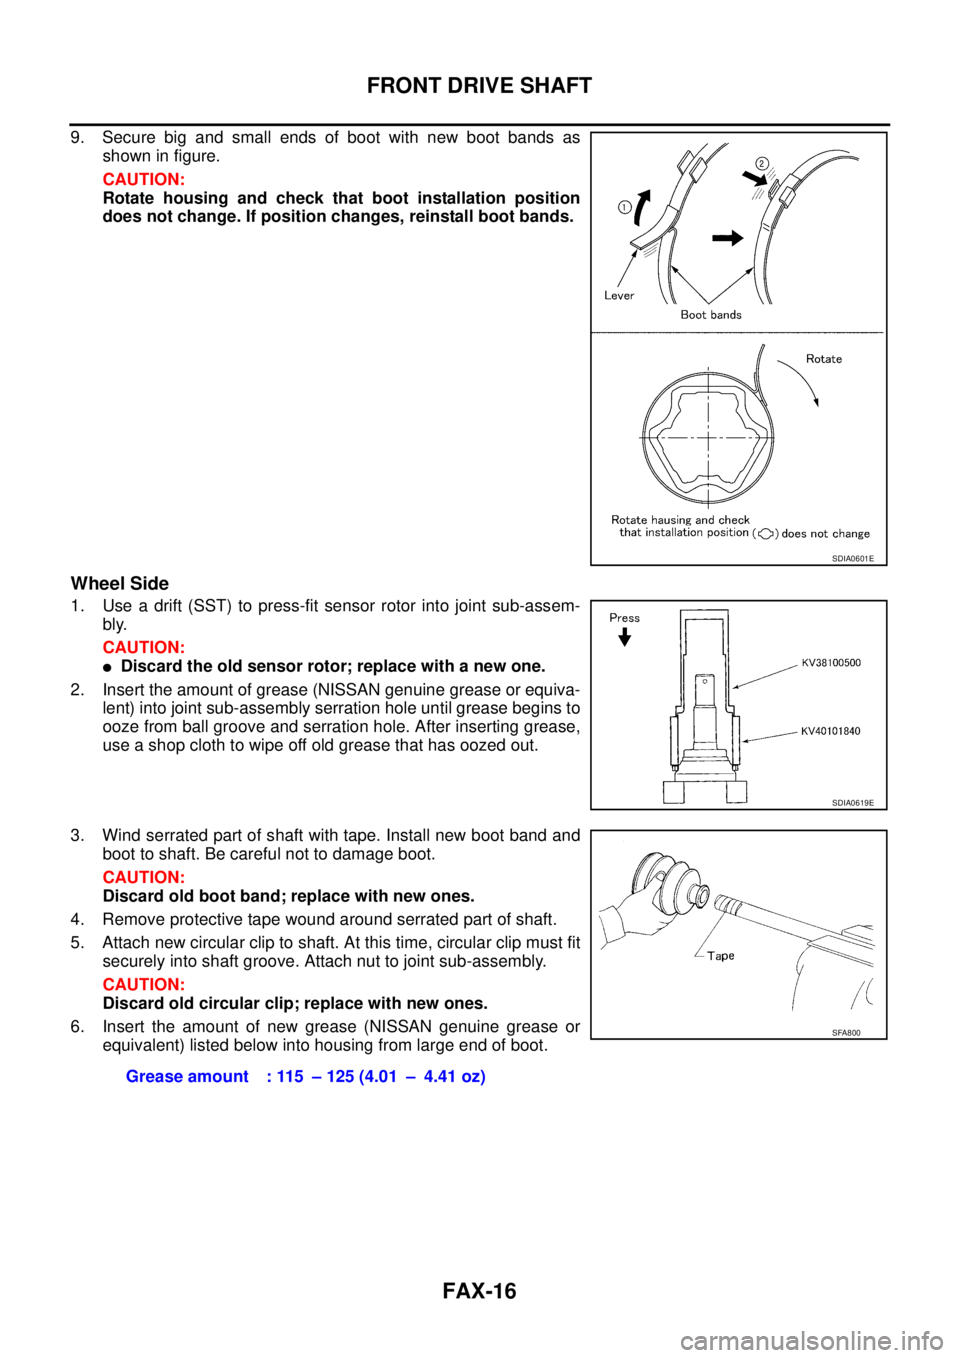 NISSAN X-TRAIL 2003  Service Repair Manual FAX-16
FRONT DRIVE SHAFT
 
9. Secure big and small ends of boot with new boot bands as
shown in figure.
CAUTION:
Rotate housing and check that boot installation position
does not change. If position c